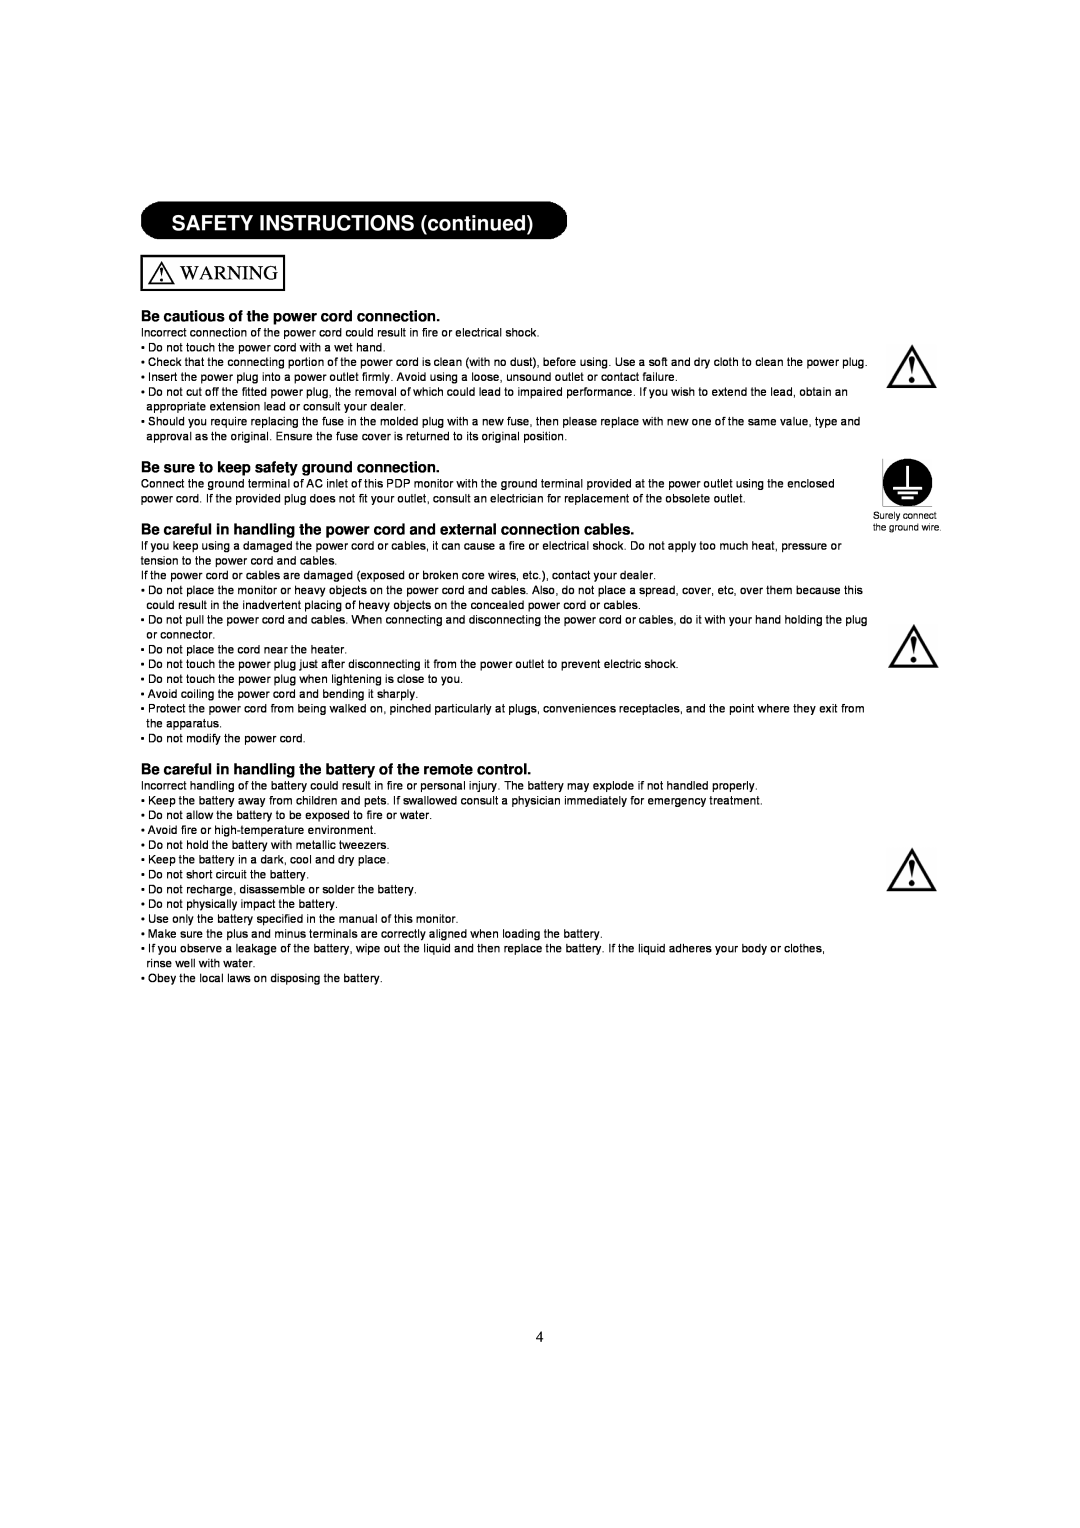 Hitachi 42HDM12A important safety instructions SAFETY INSTRUCTIONS continued, Be cautious of the power cord connection 